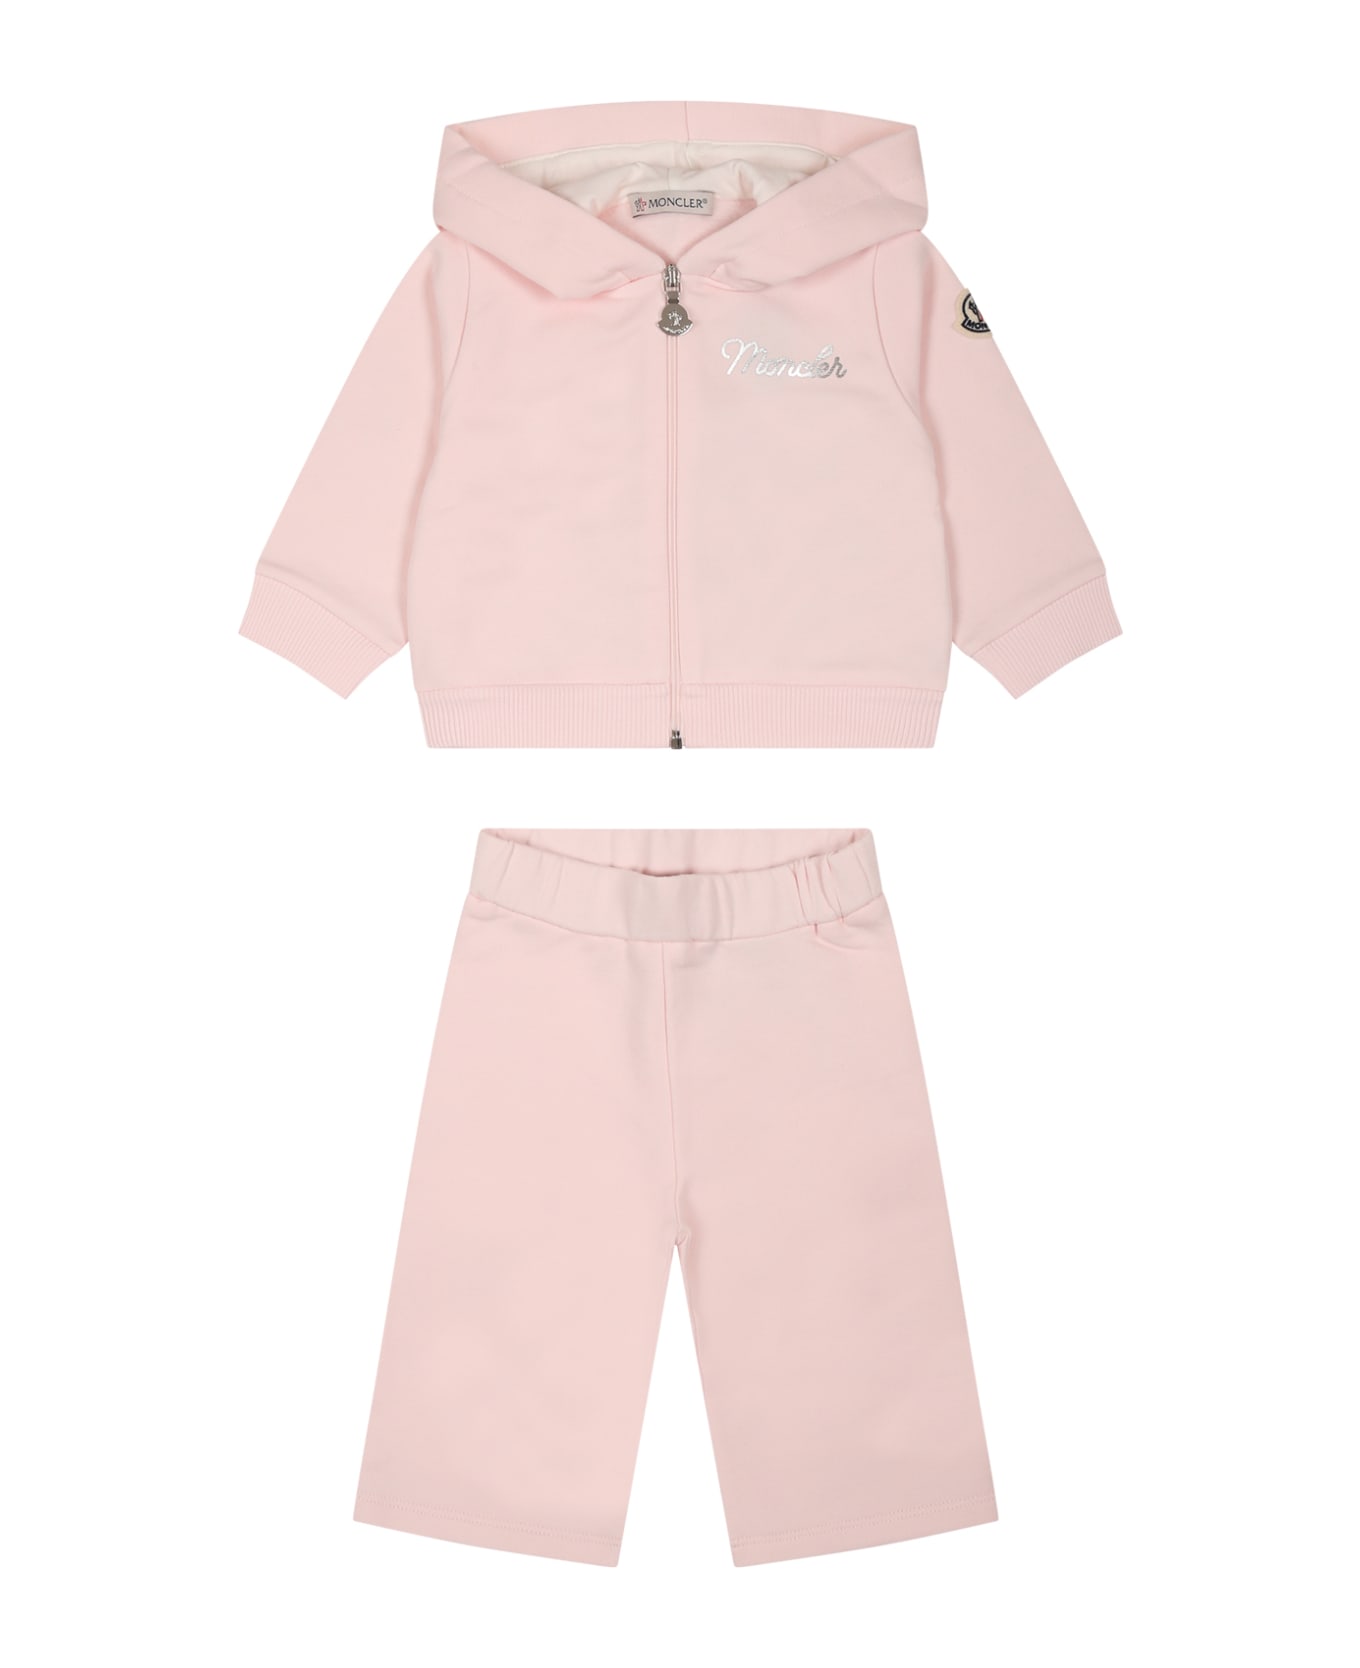 Moncler Pink Suit For Baby Girl With Logo - Pink ボトムス